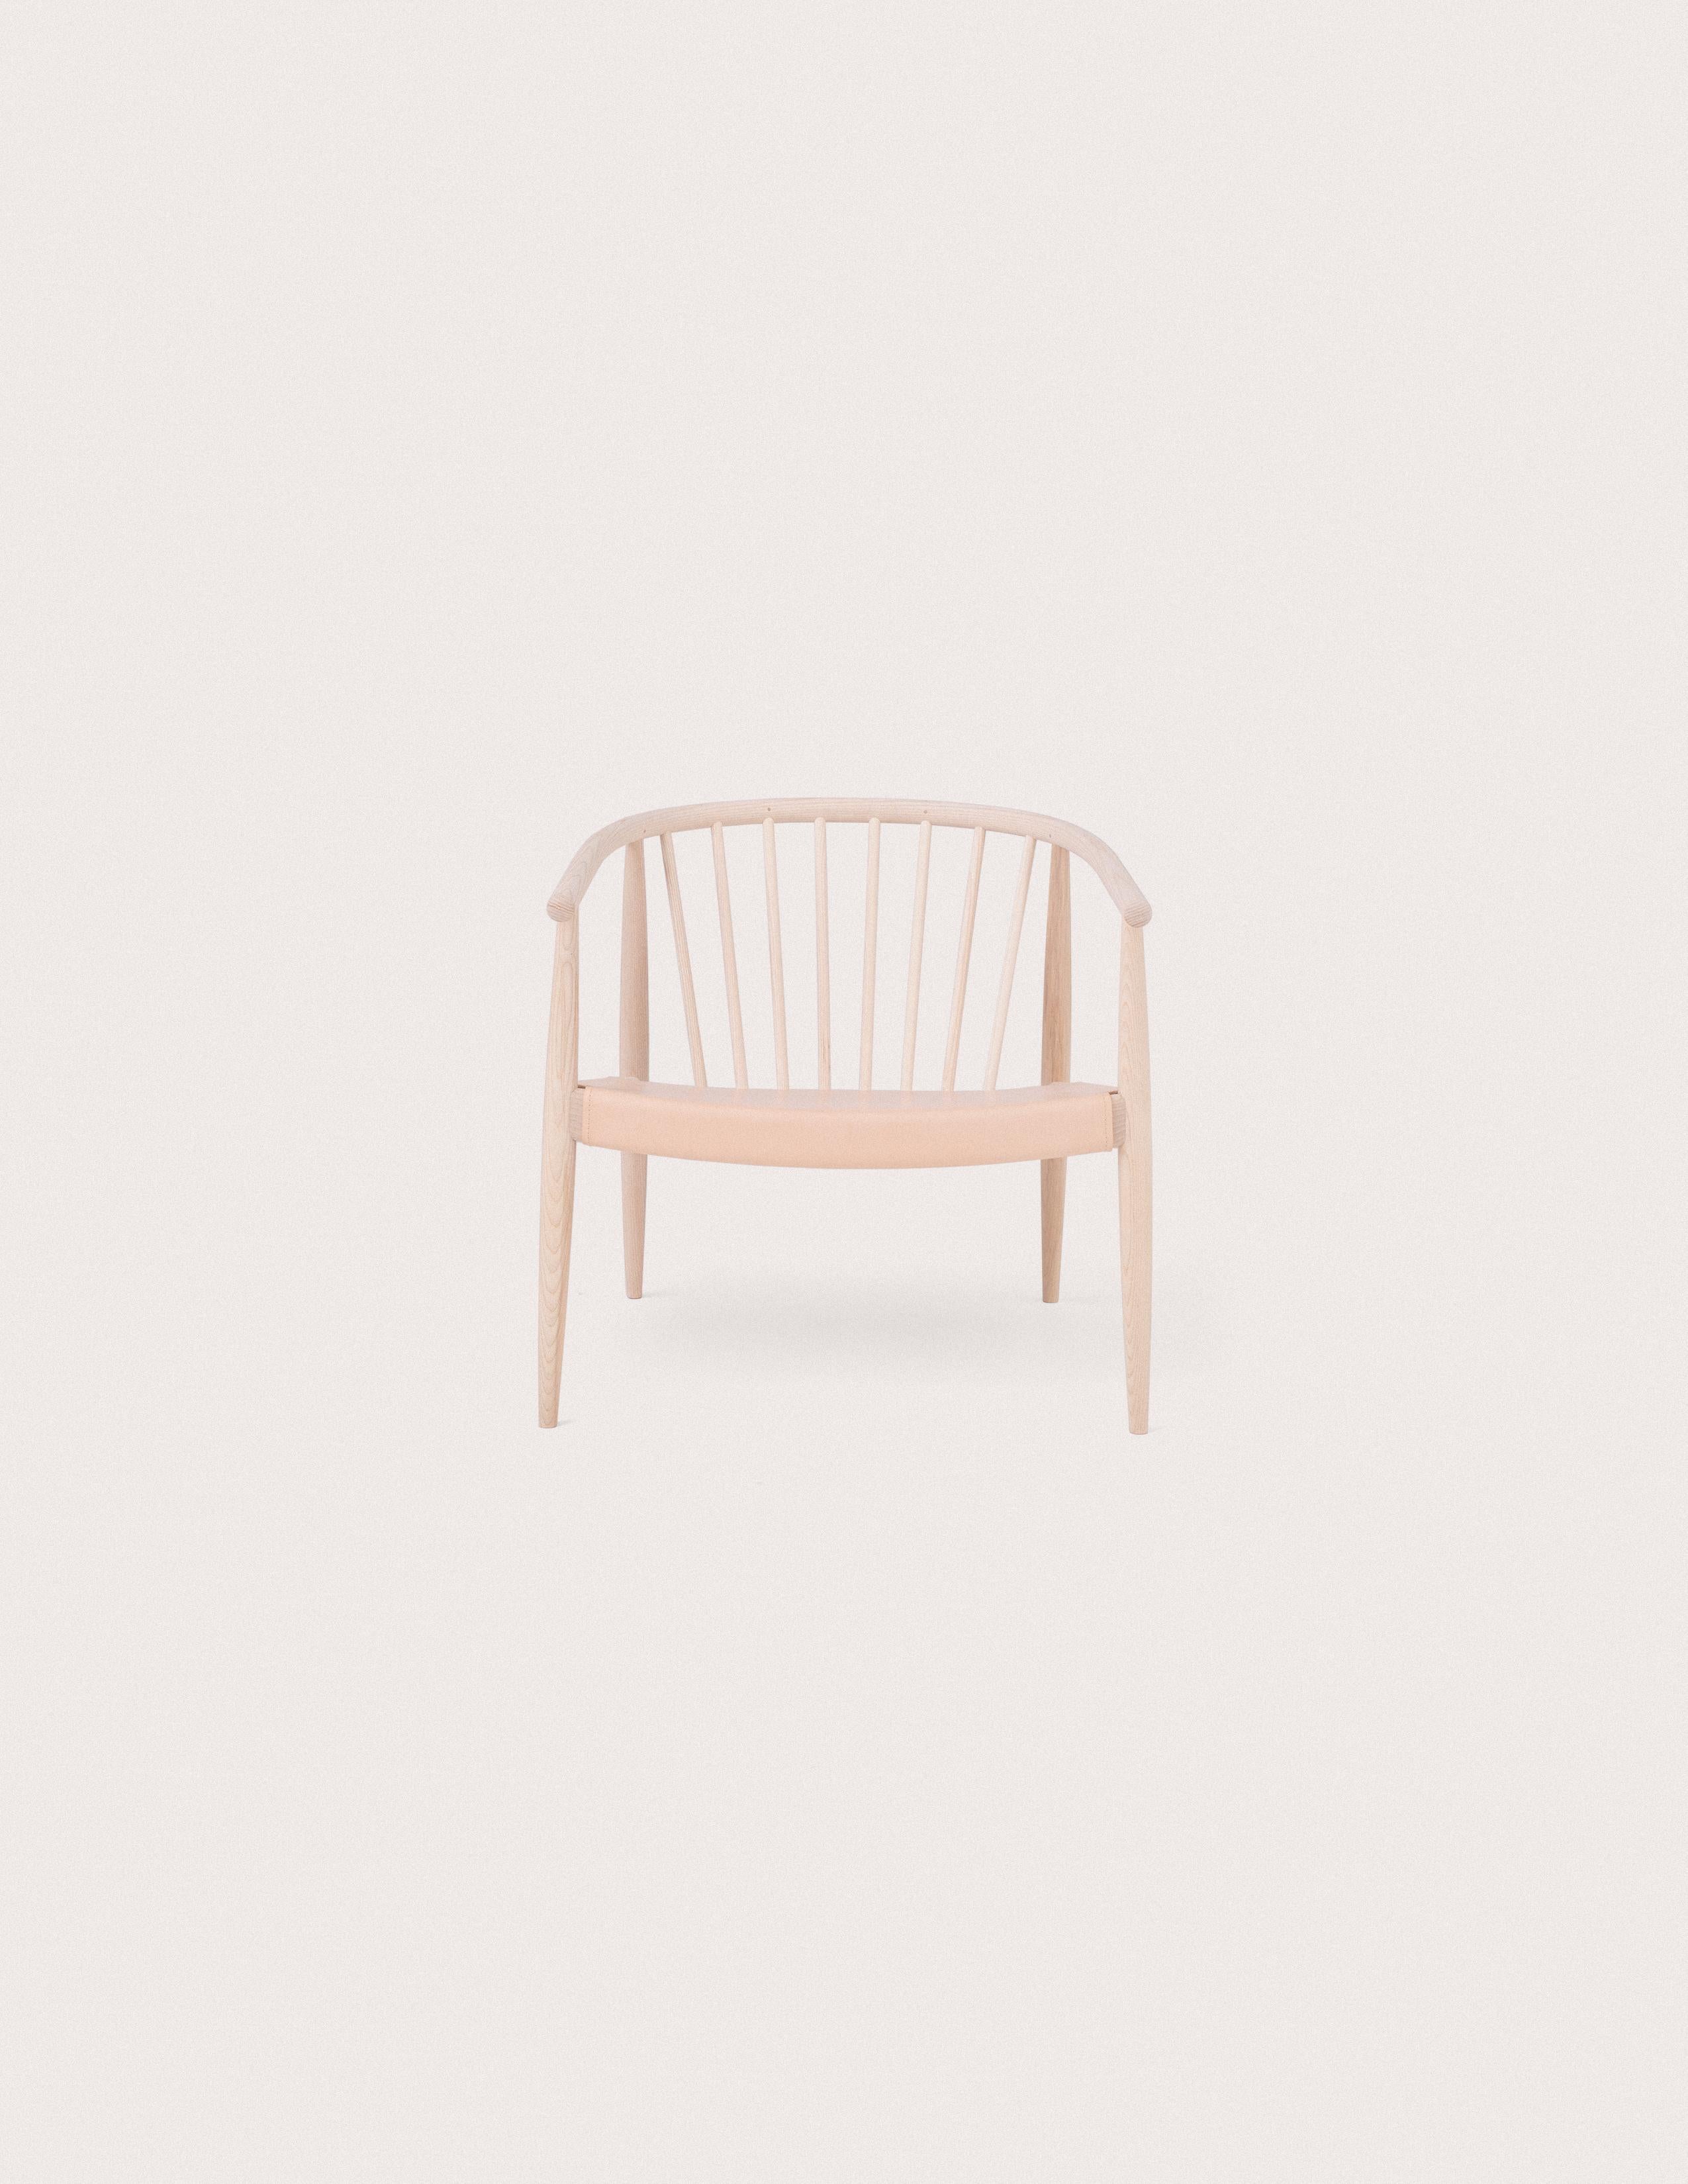 L.Ercolani Reprise Chair with Hide Seat by Norm Architects For Sale 6